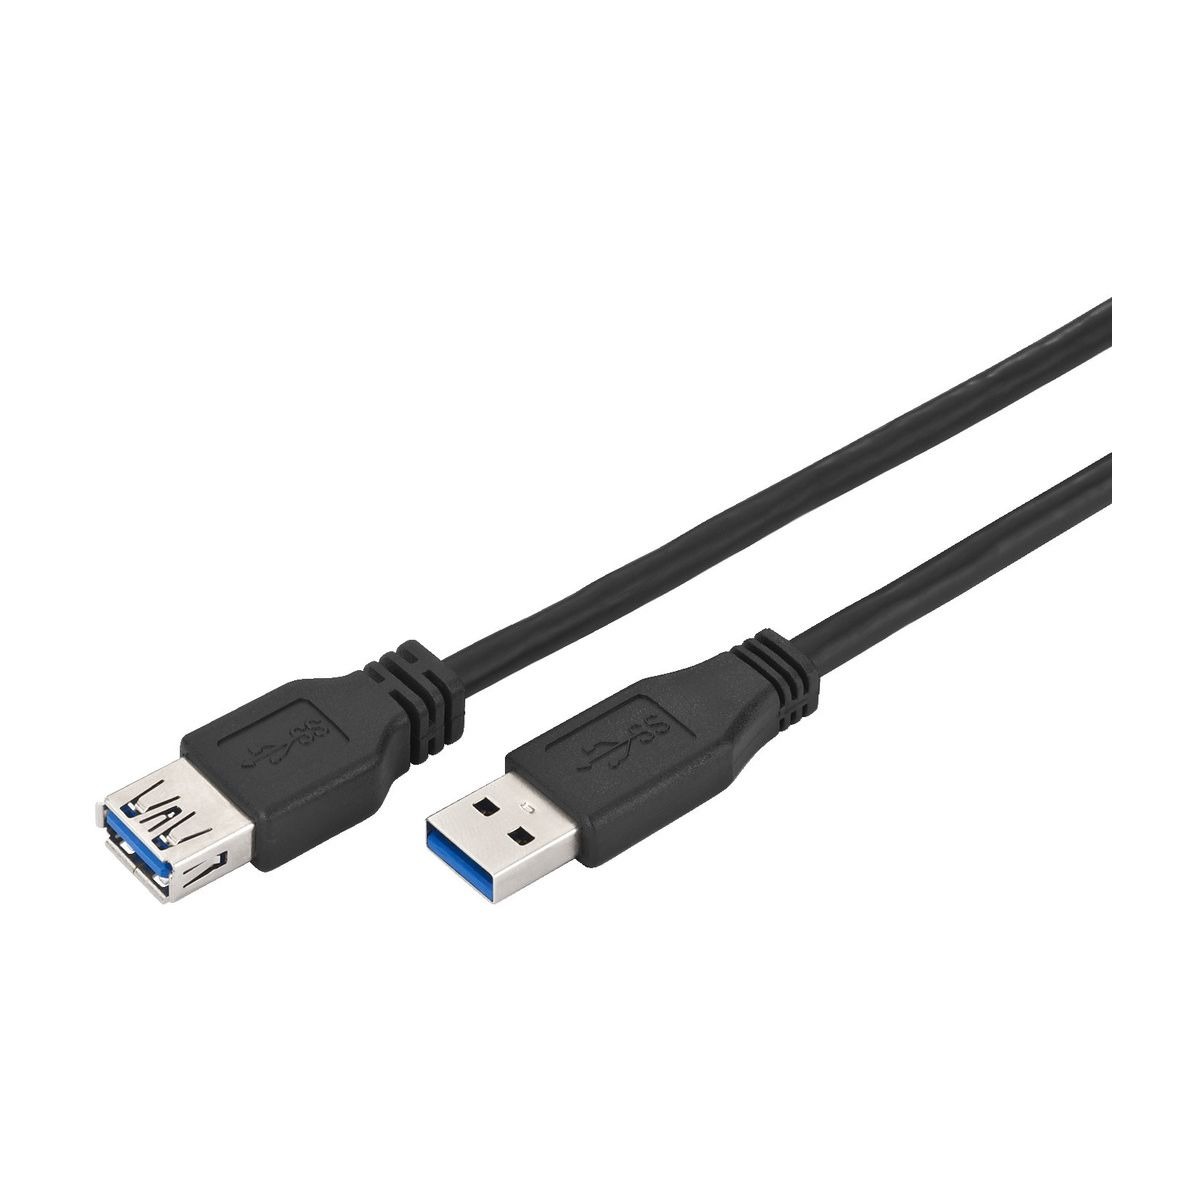 USBV-303AA | USB 3.0 extension cable, 3 m-0